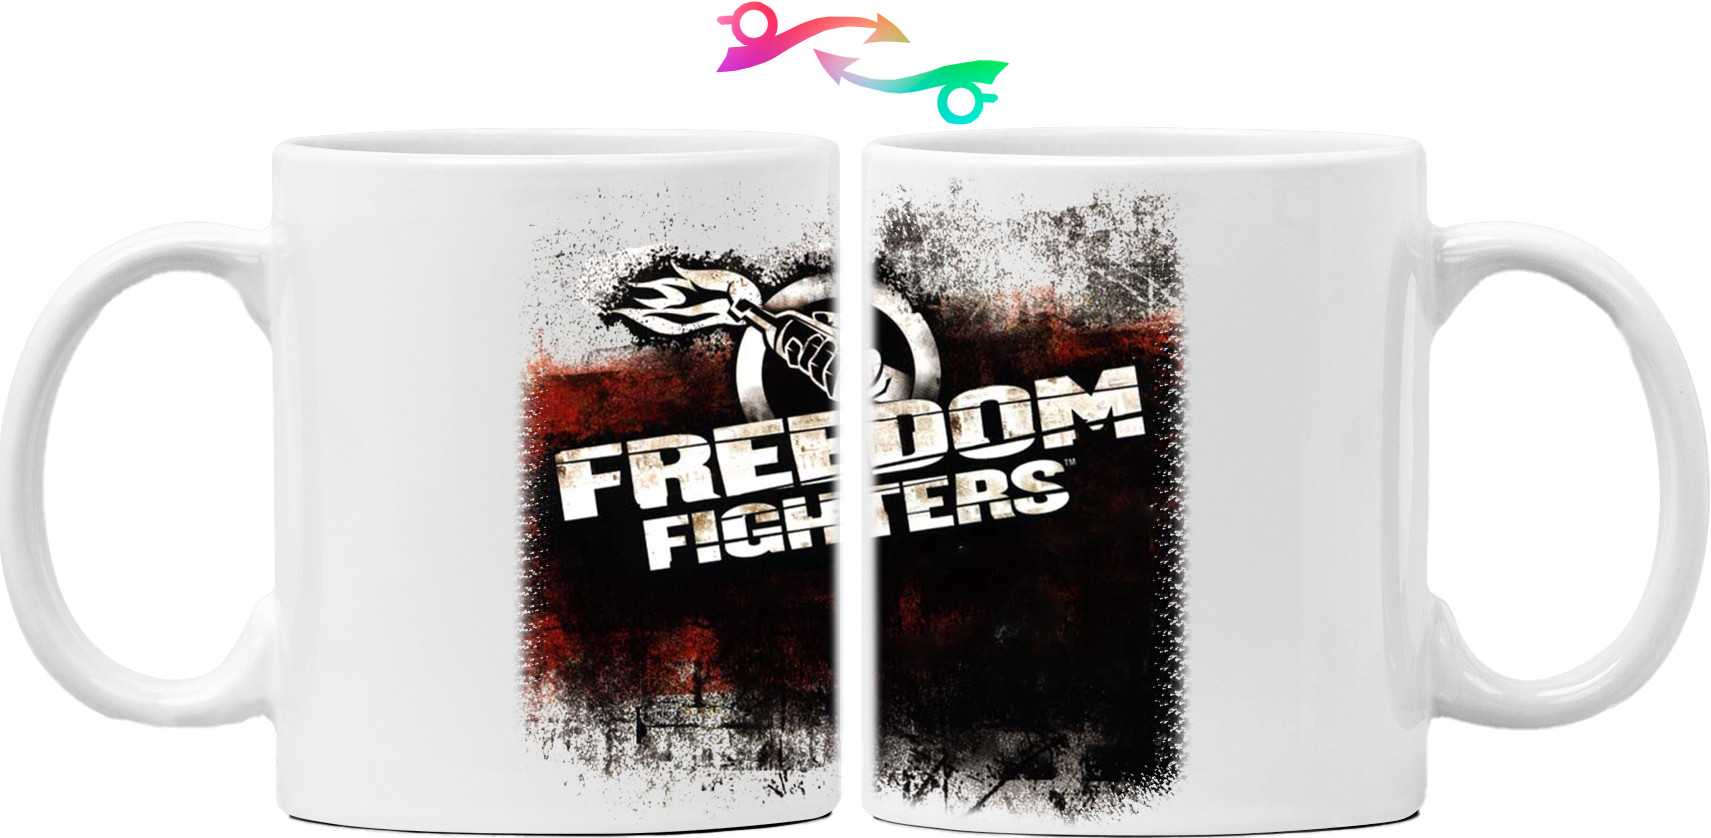 Freedom fighters (1)